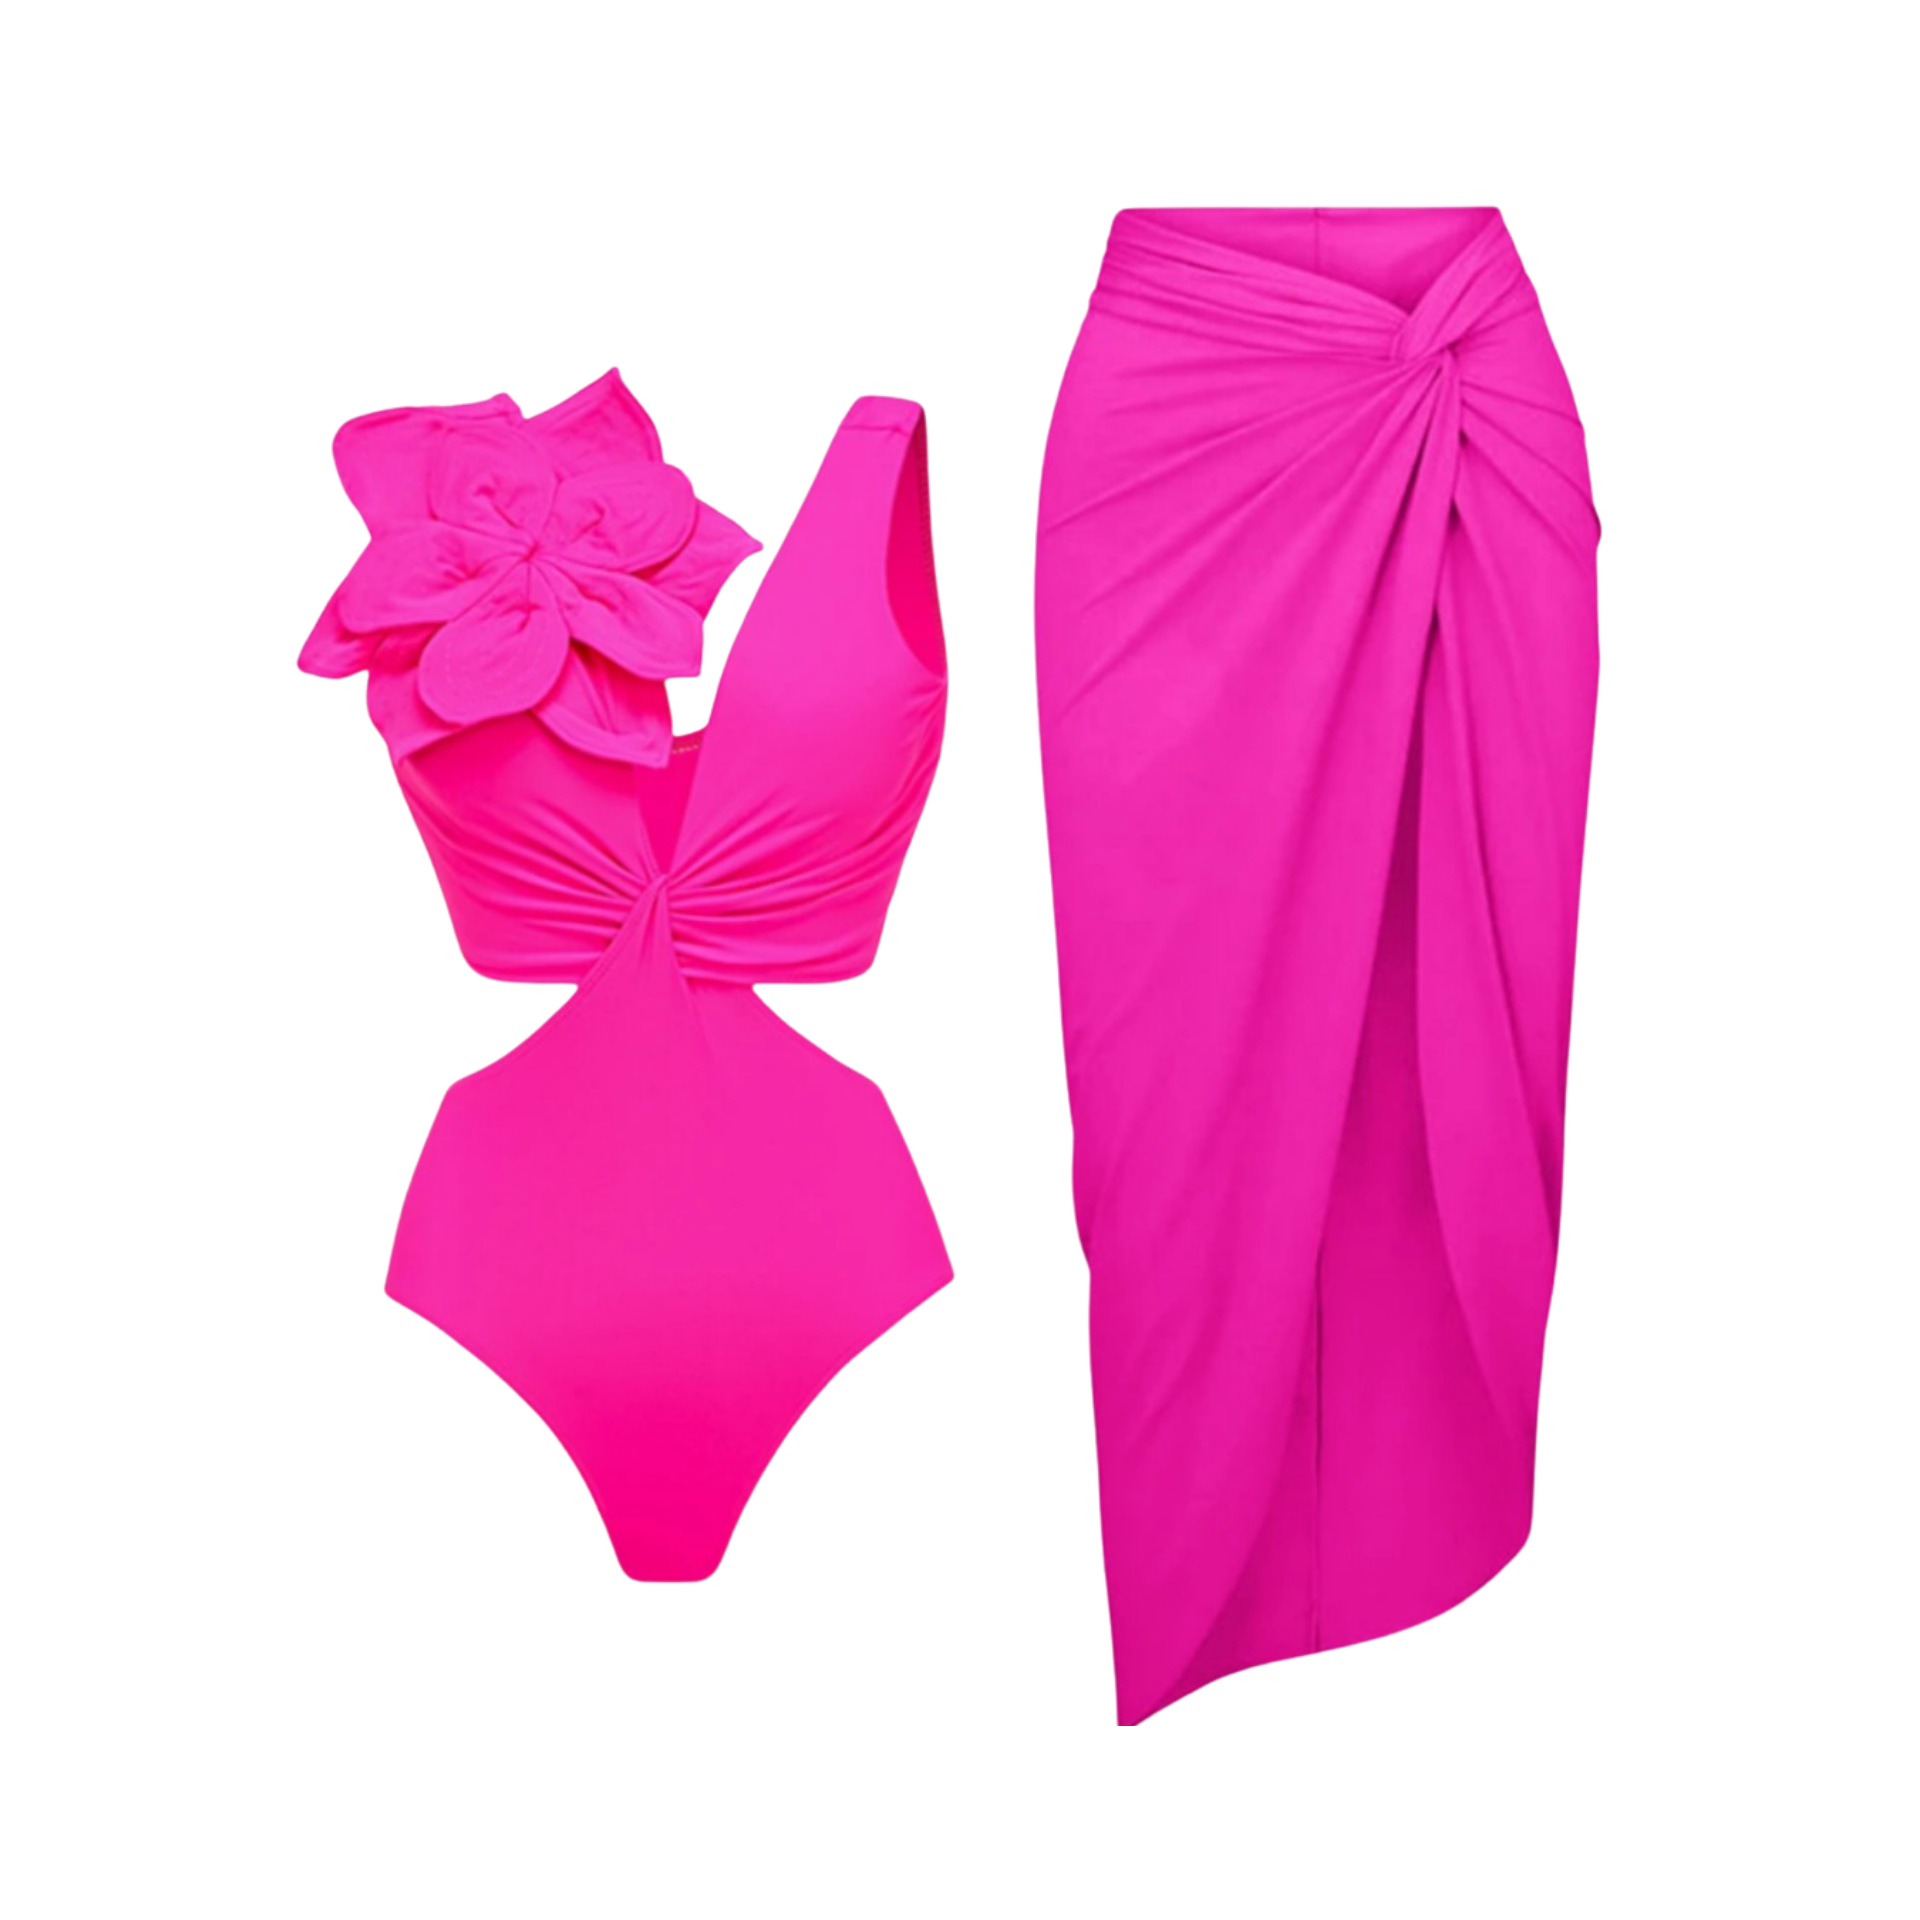 3D Flower Ruffle One-Piece Swimsuit + Cover Up Sets